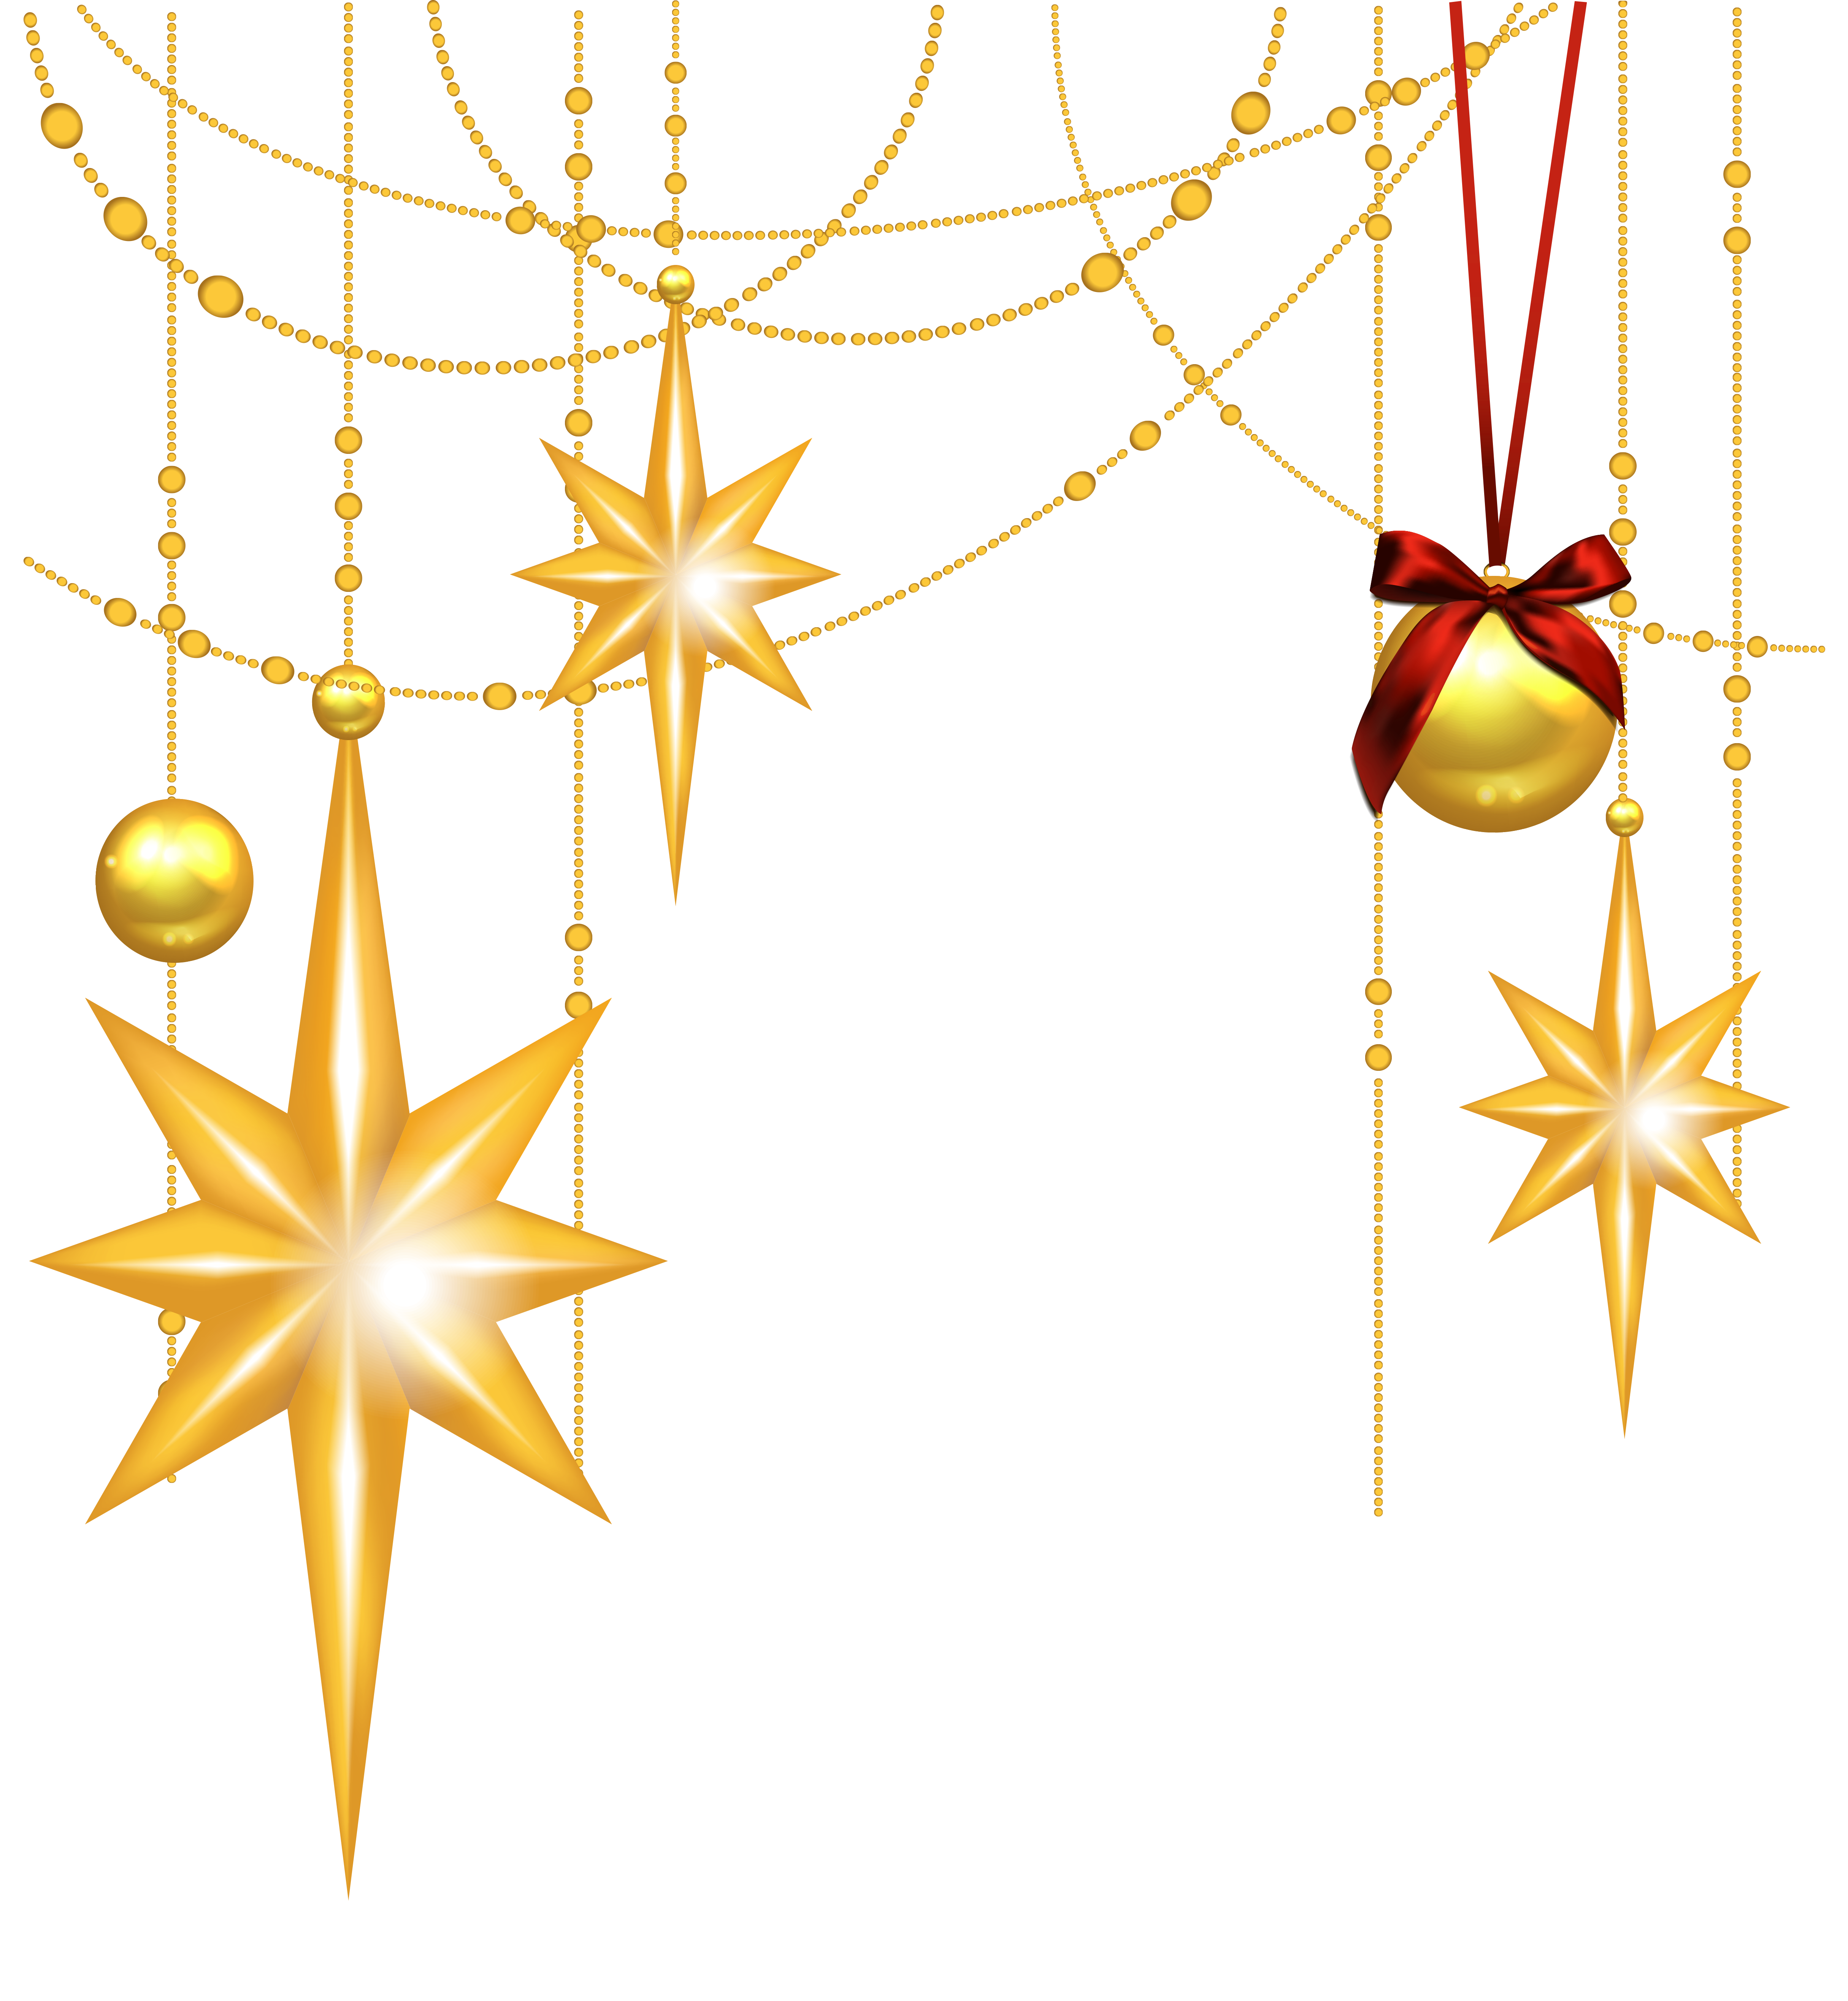 Transparent gold stars and. Farmhouse clipart christmas